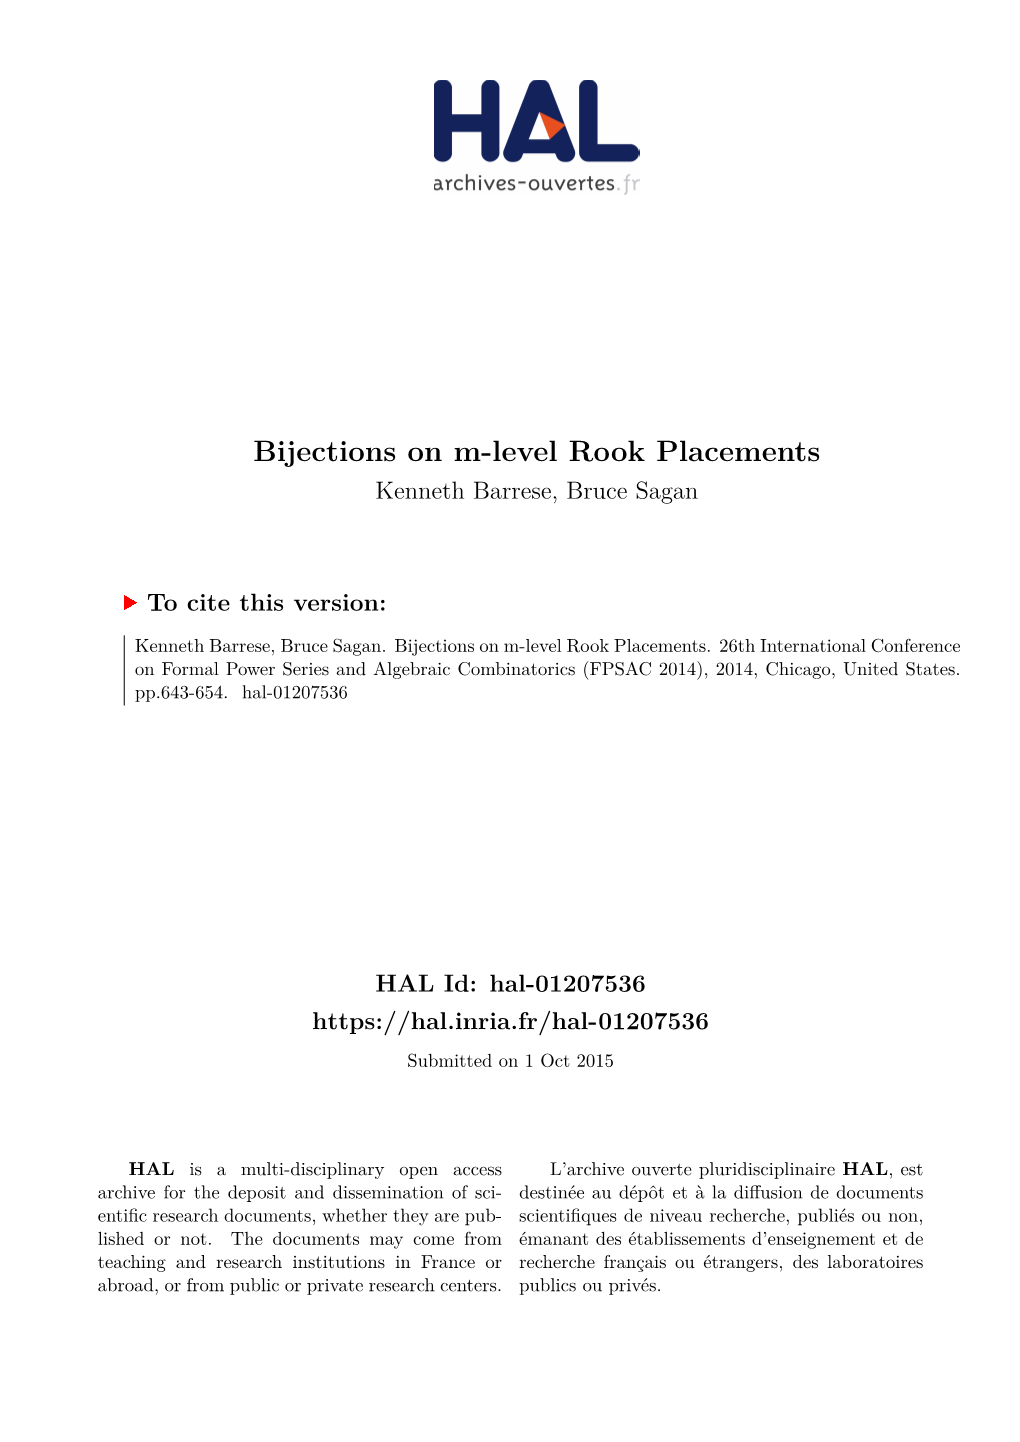 Bijections on M-Level Rook Placements Kenneth Barrese, Bruce Sagan